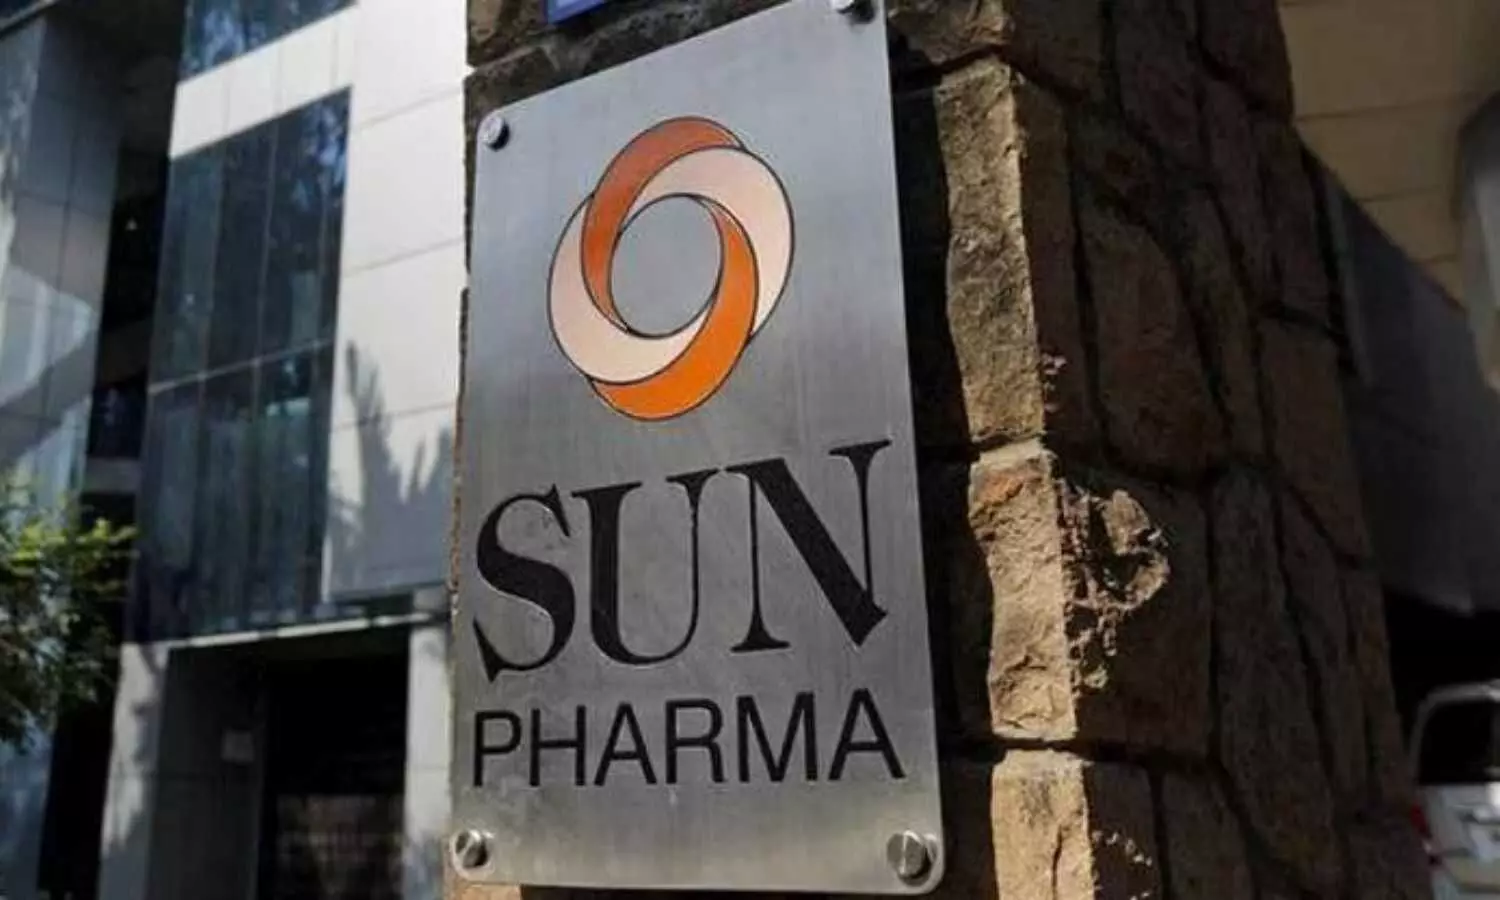 Conduct PK study for repeated dose and Phase III CT : CDSCO Panel tells Sun Pharma on Psoriatic drug combination